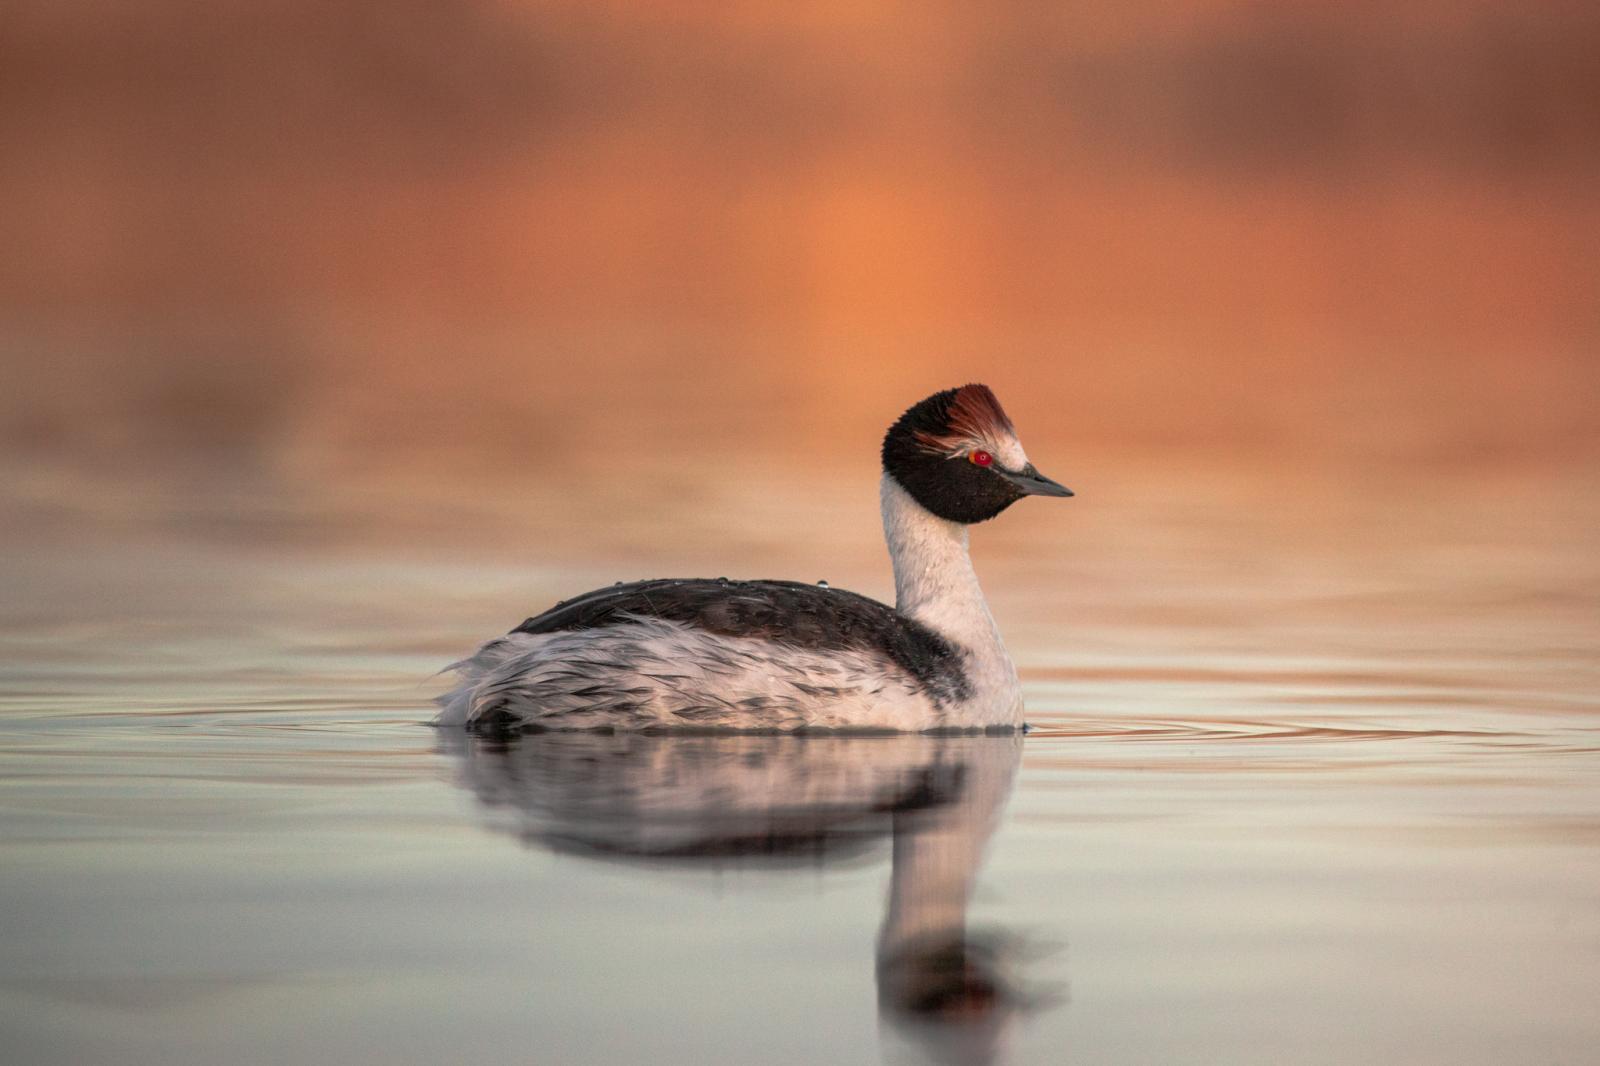 A glimpse of hope for the Hooded Grebe